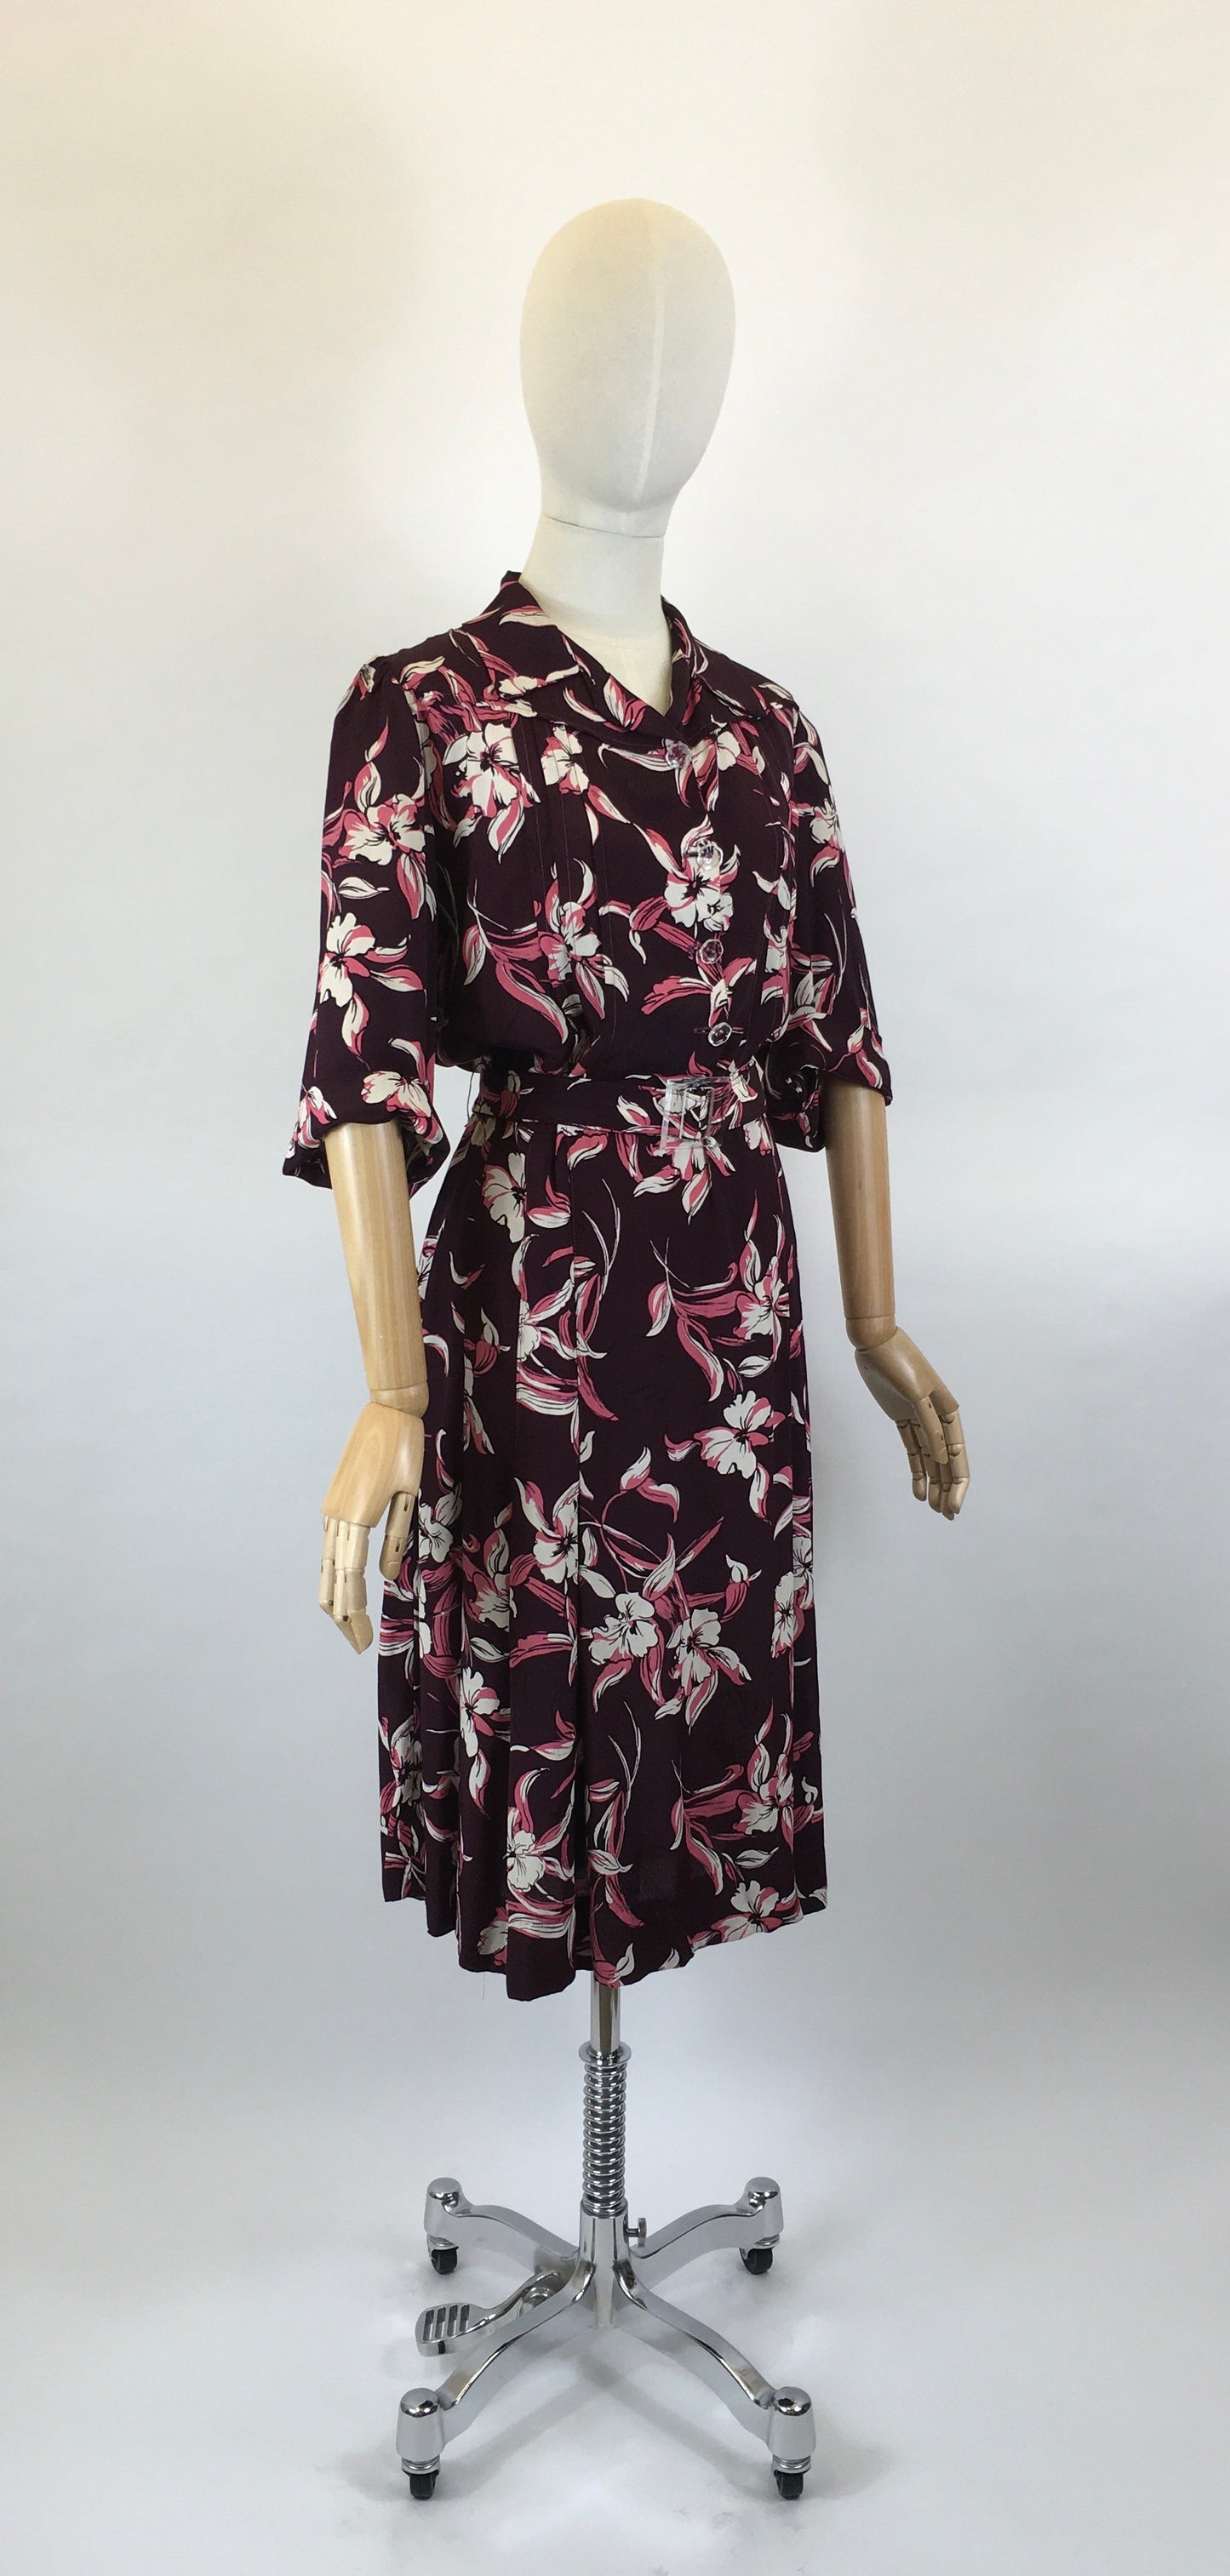 Original 1940’s Stunning Volup Rayon Dress - In A Winter Berry Floral